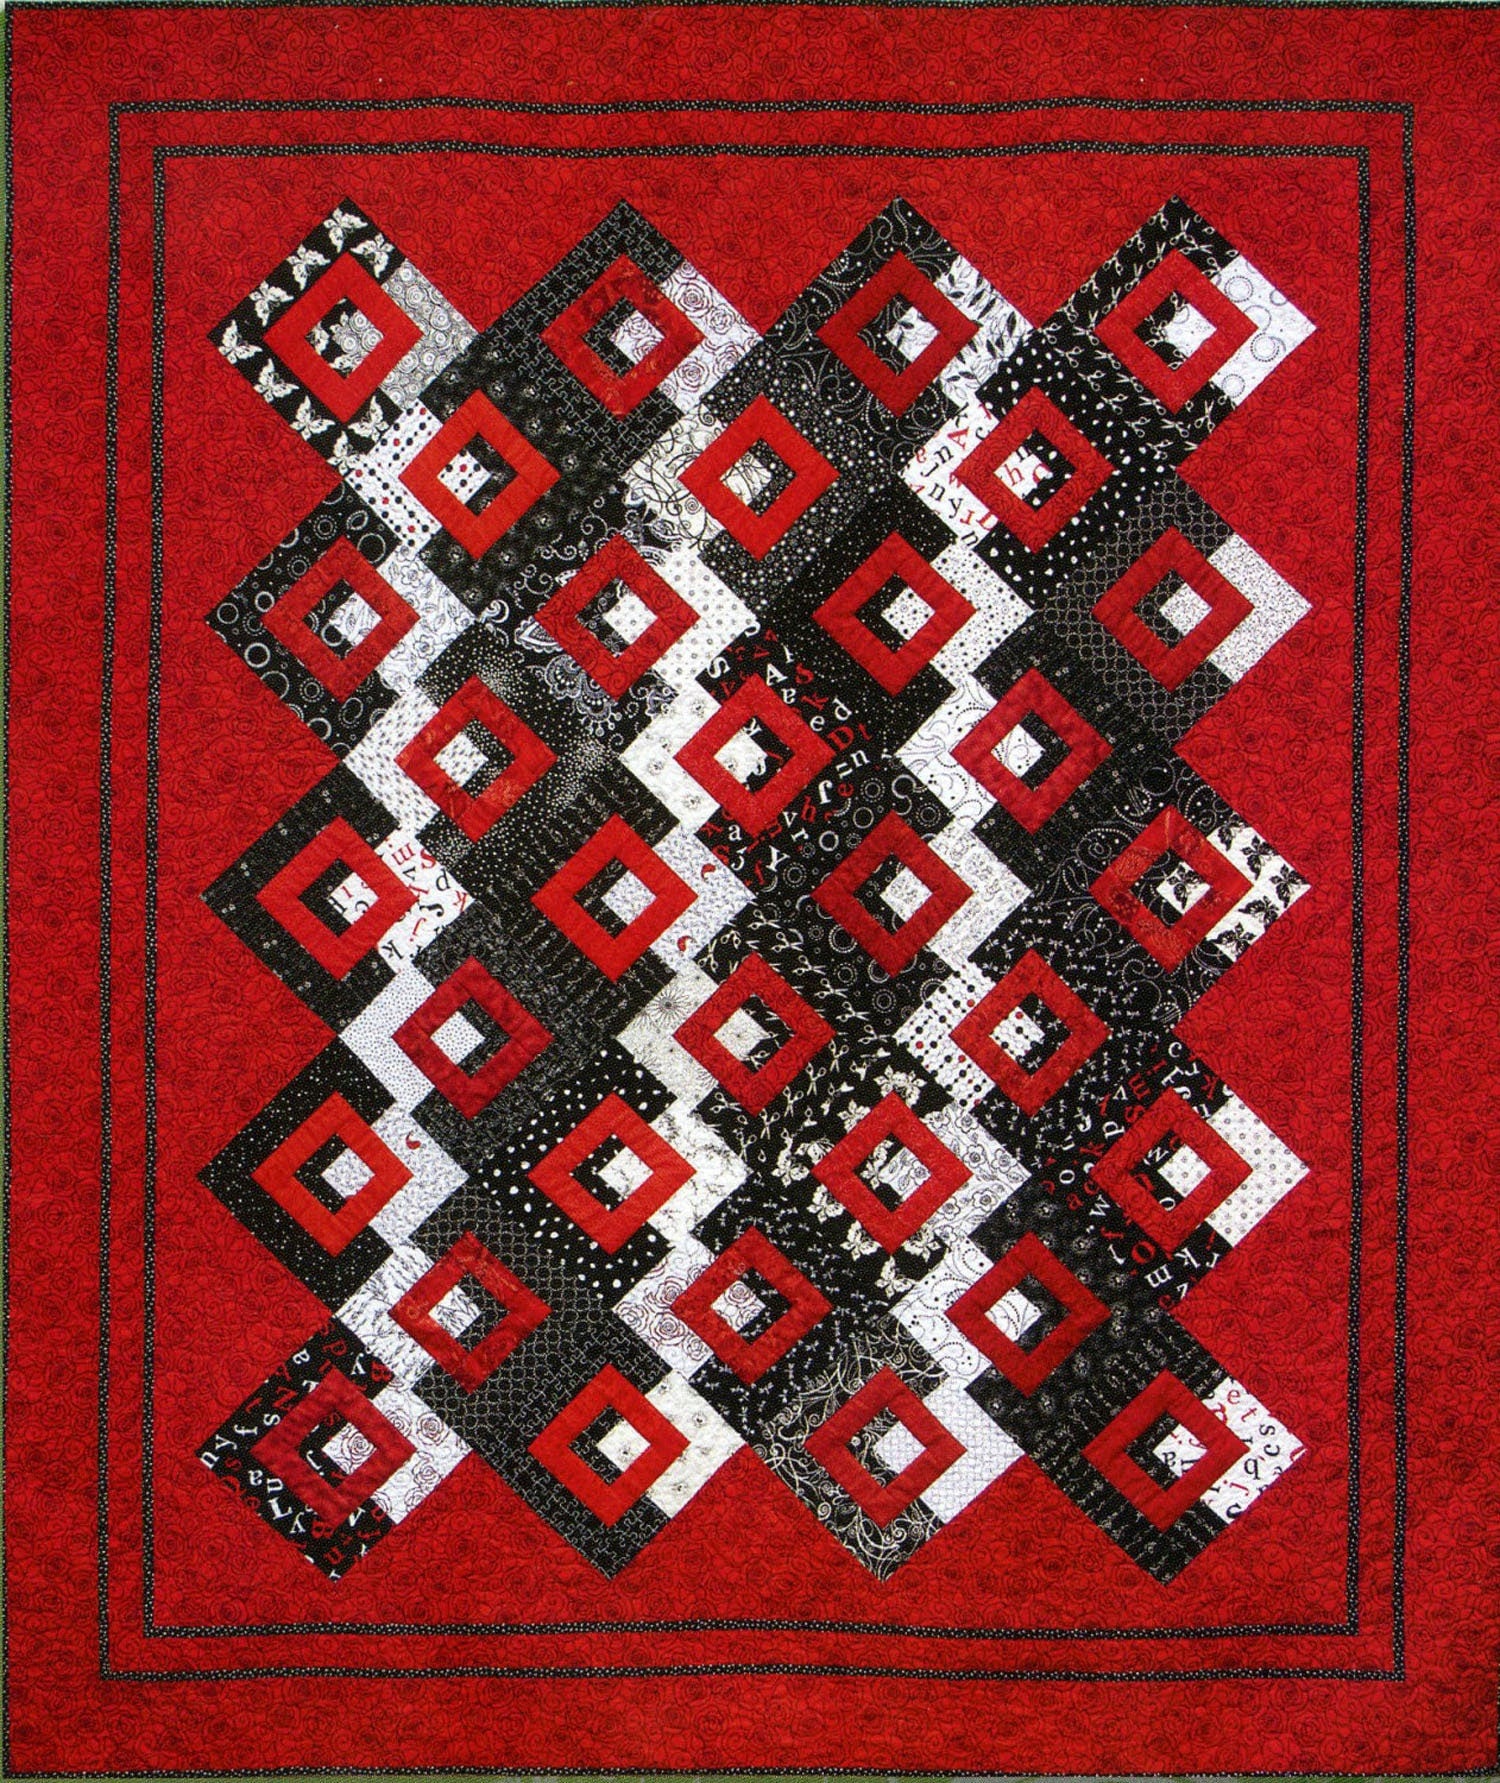 LAST CALL Hot Ziggity Quilt Pattern, Black Cat Creations Hz-Bcc-163, F8 Fat Eighths Quarter FQ Friendly Three Color Throw Twin Quilt Pattern